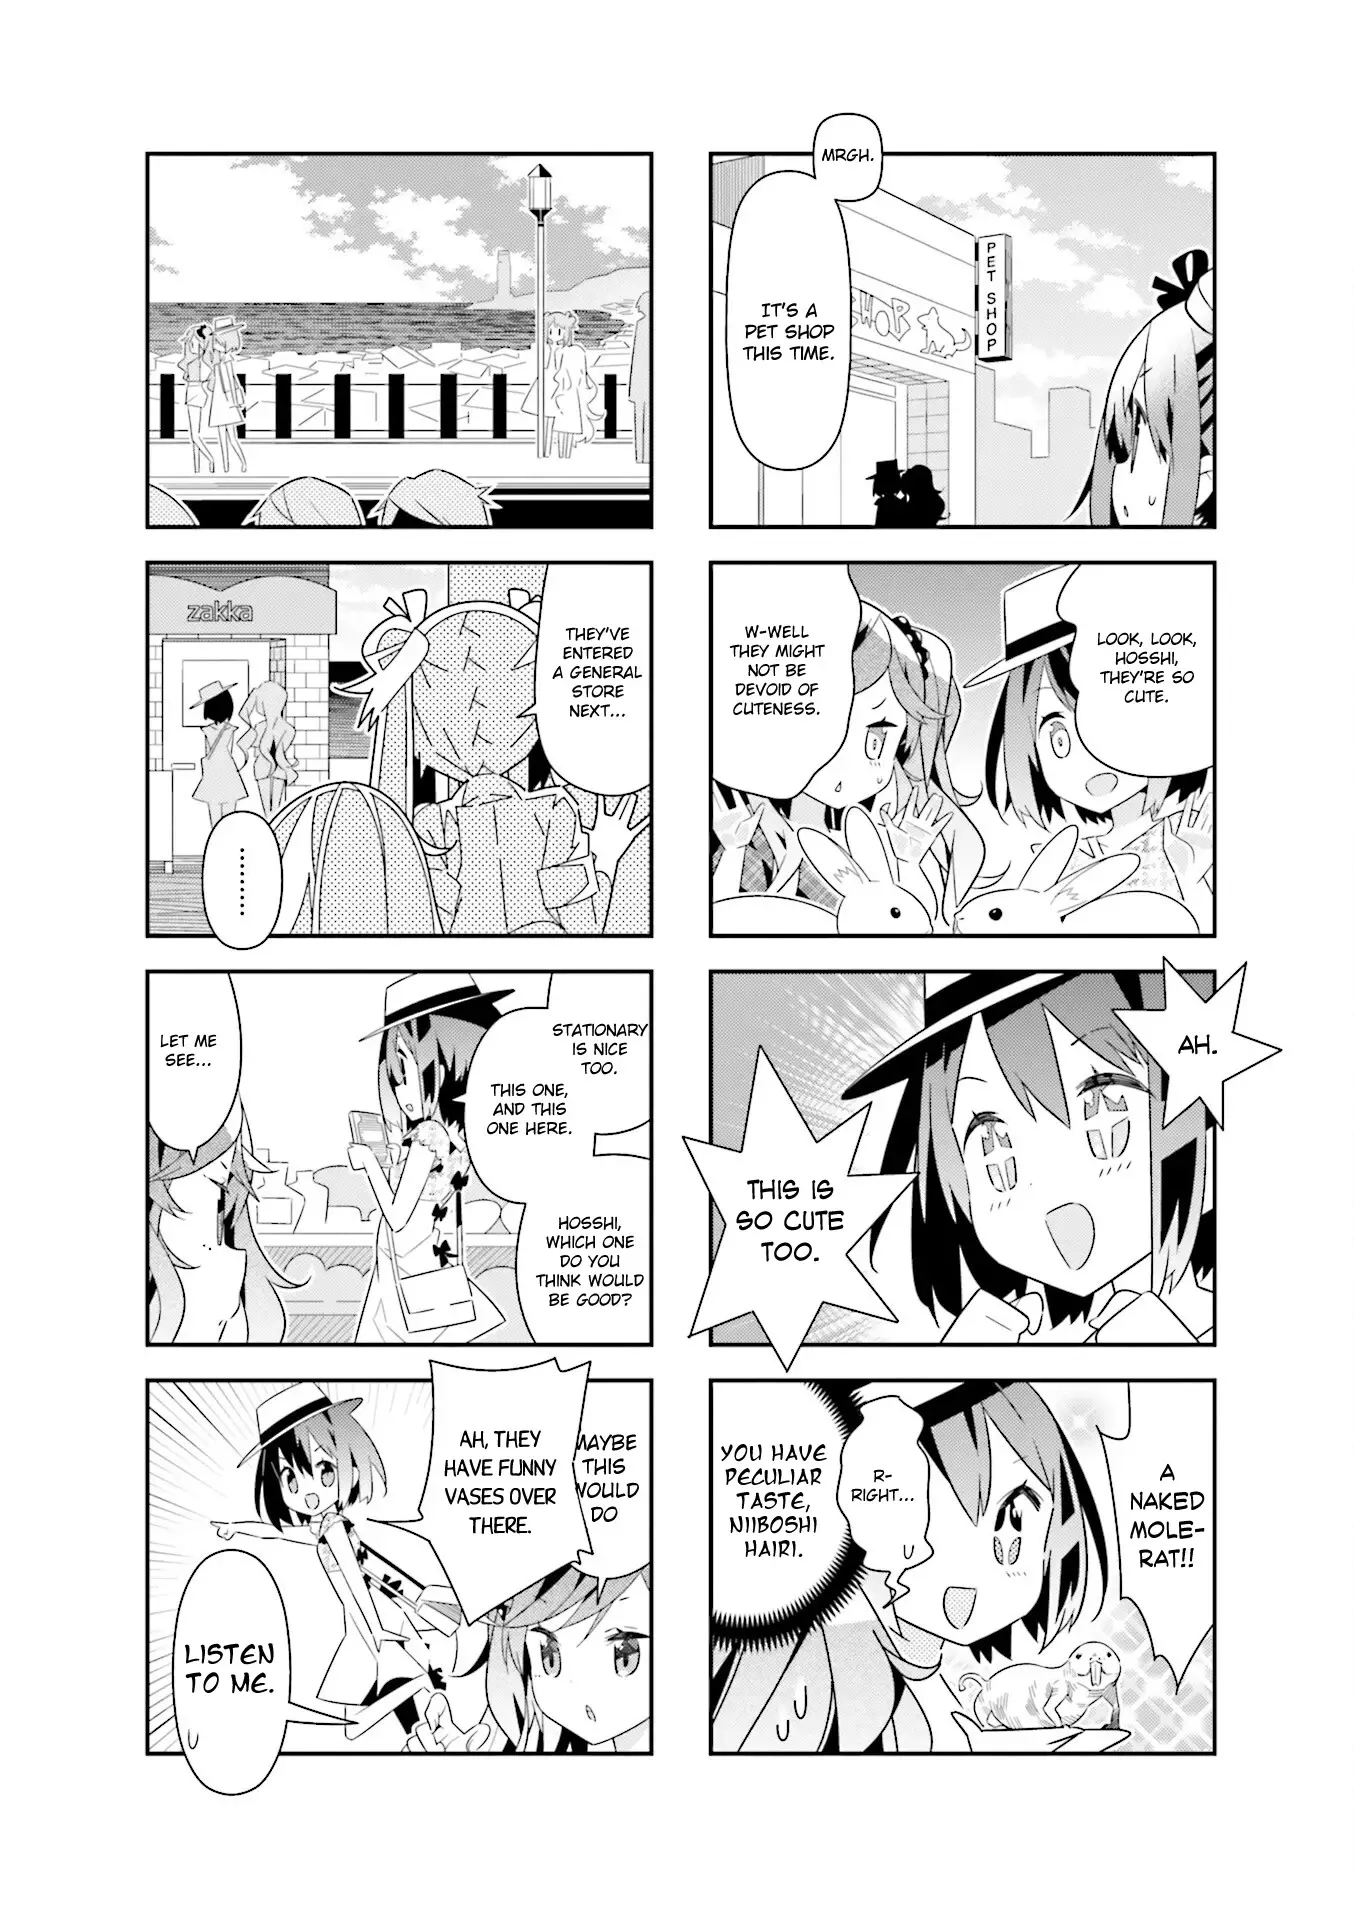 The Life After Retirement Of Magical Girls - 23 page 4-69479026